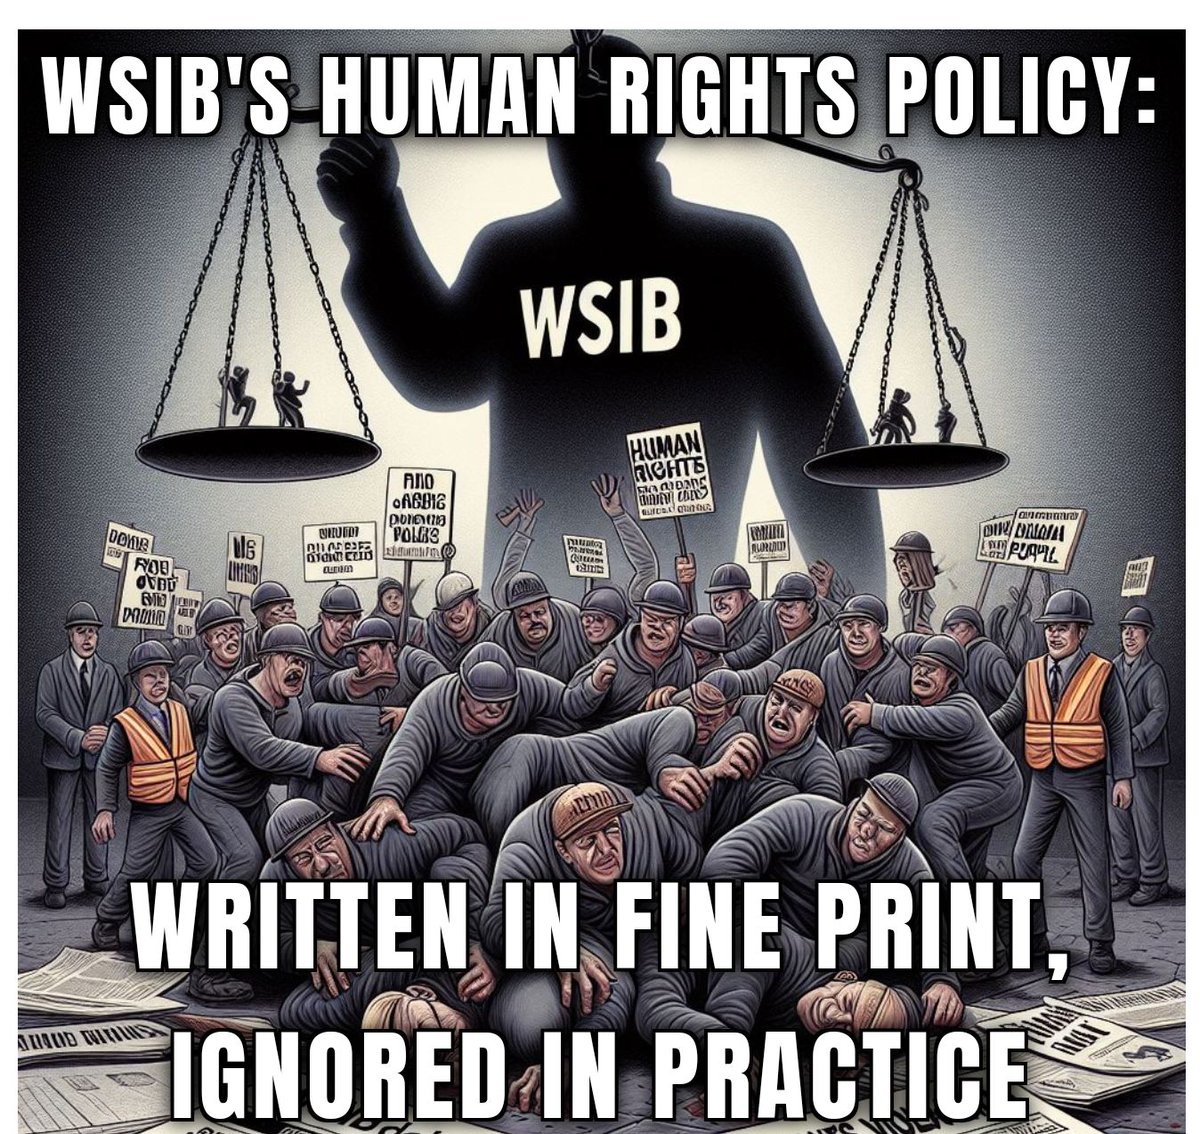 WSIB's human rights policy: written in fine print, ignored in practice. 
Let's demand action, not just words! #InjuredWorkers #HumanRights #DemandAction